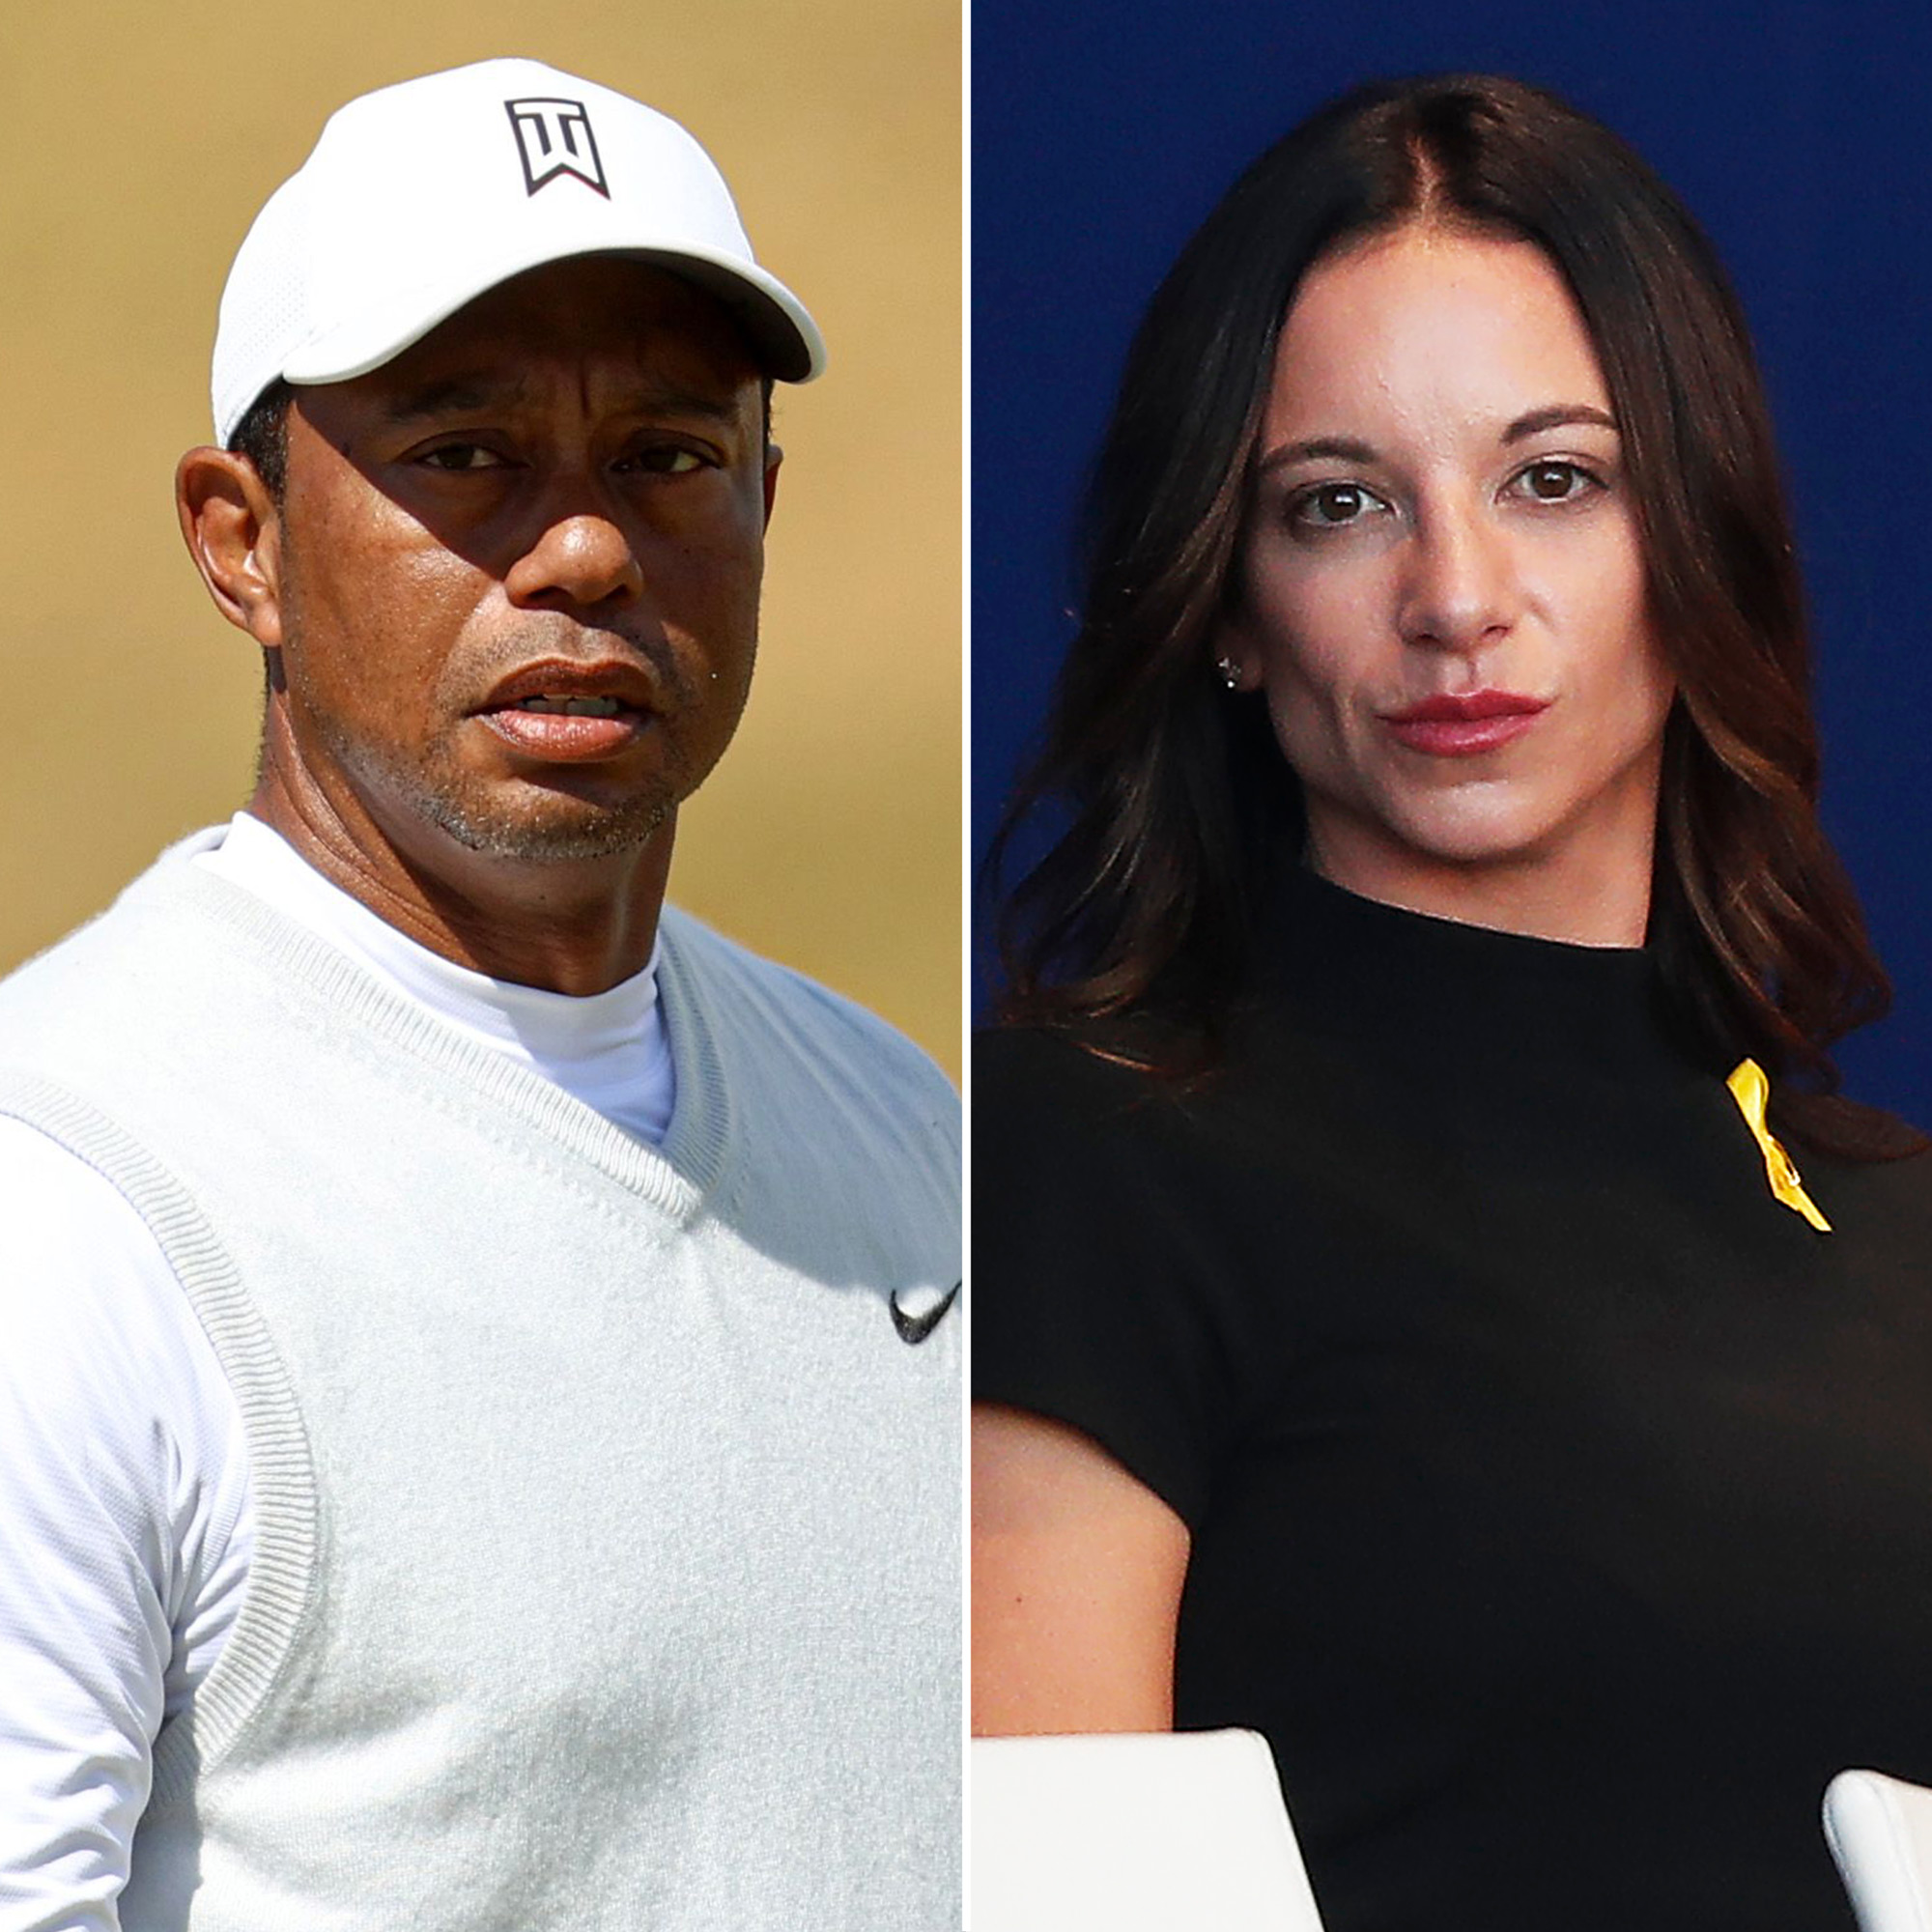 Tiger Woods and Erica Hermans Messy Split What to Know picture image